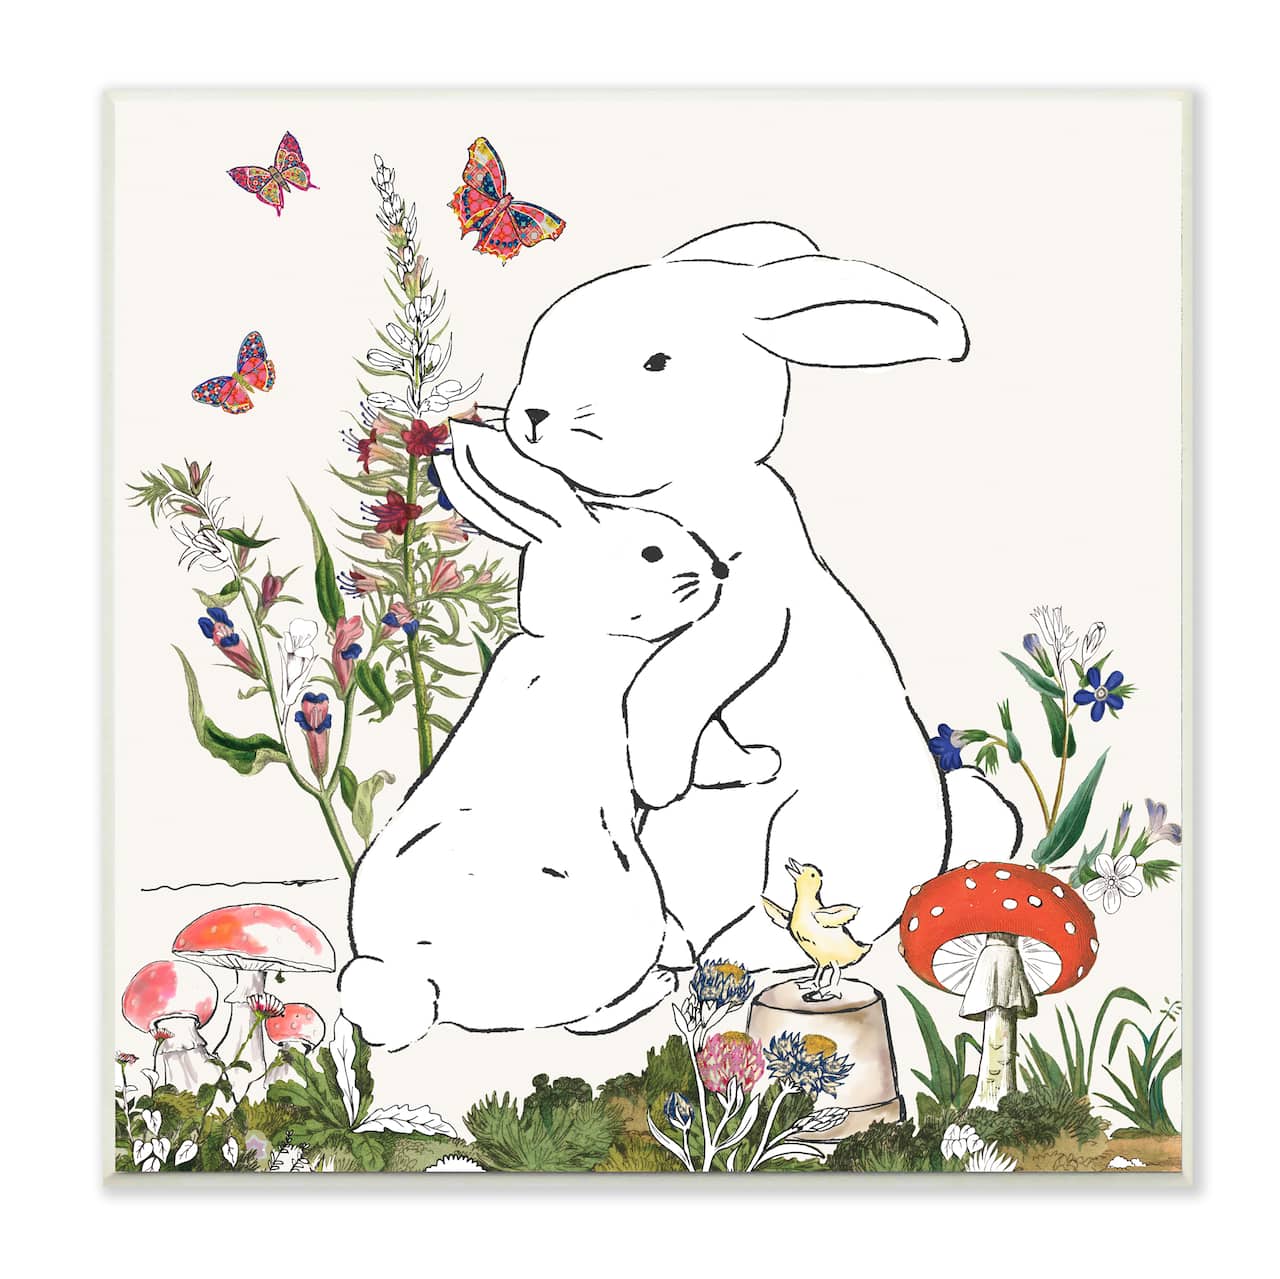 Stupell Industries Rabbit Hugs in Spring Meadow Wall Plaque